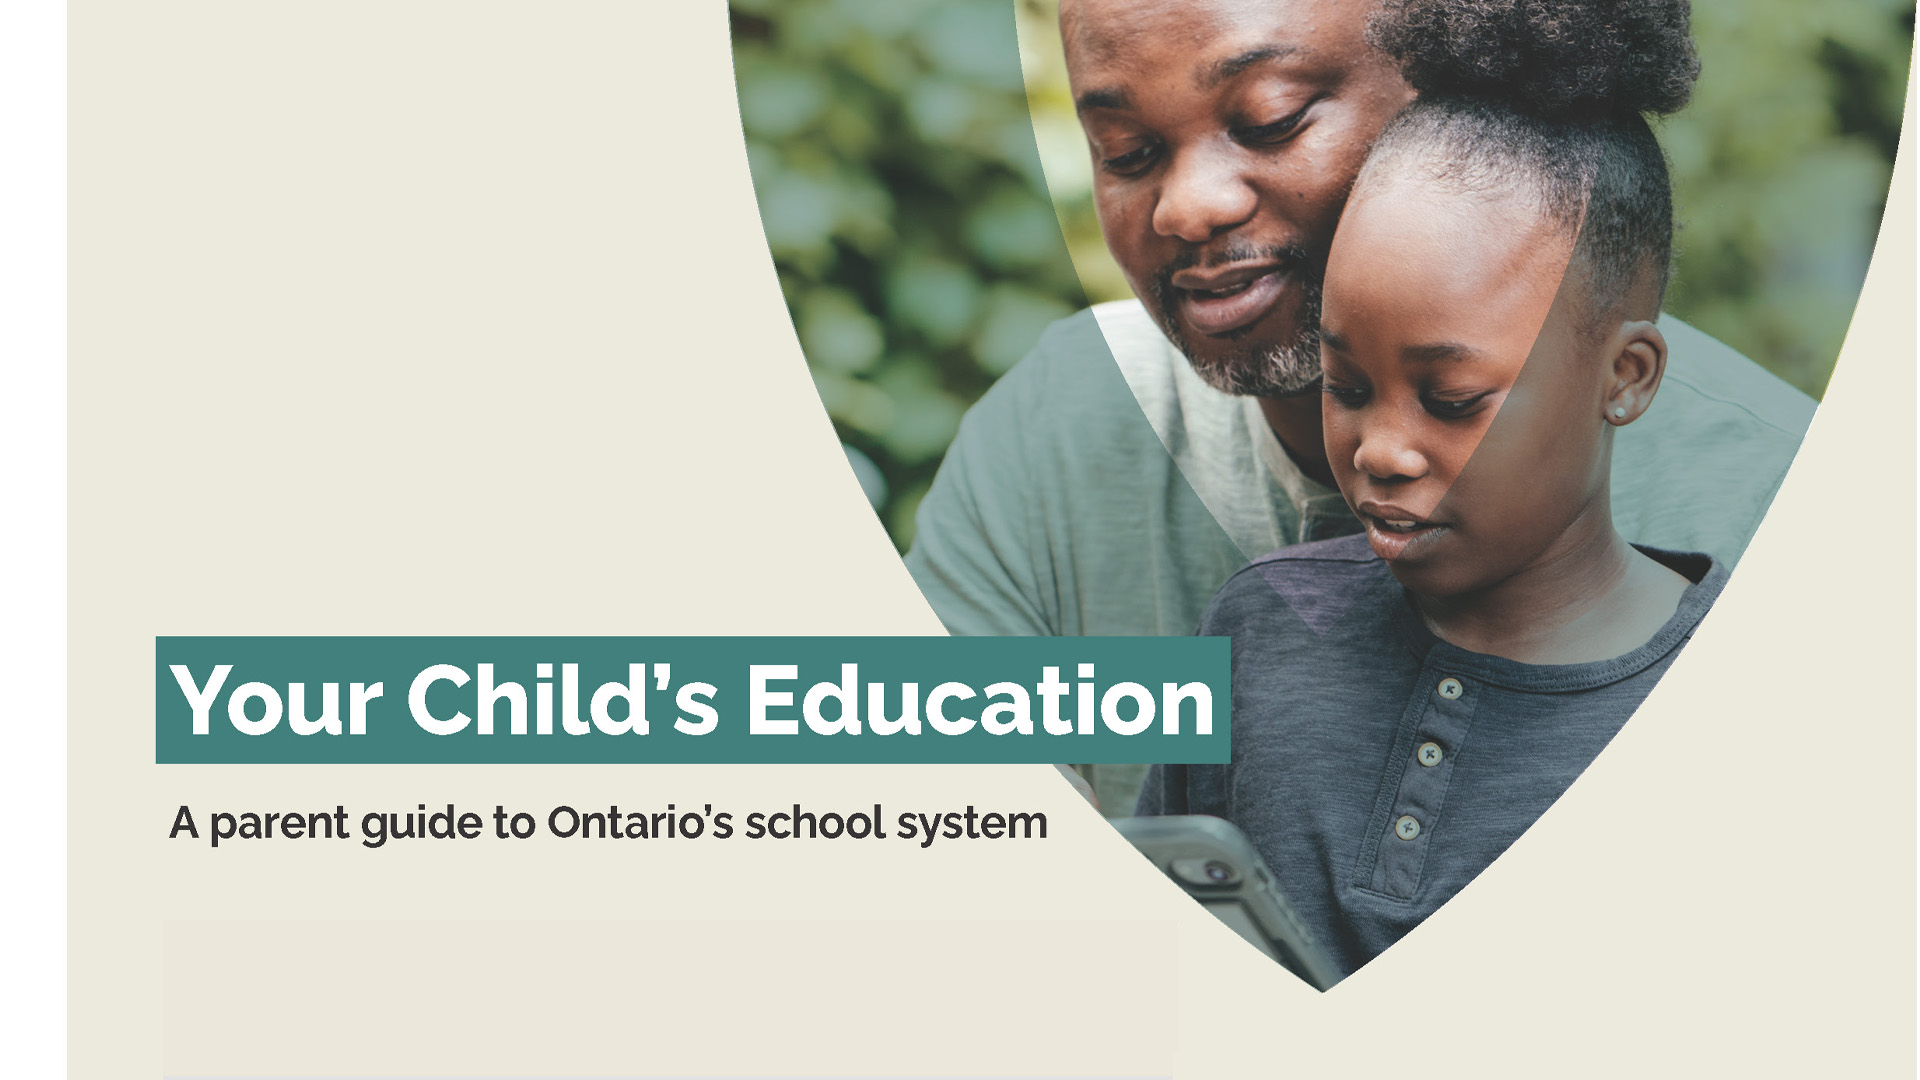 Ministry of Education Launches New Parent Guide